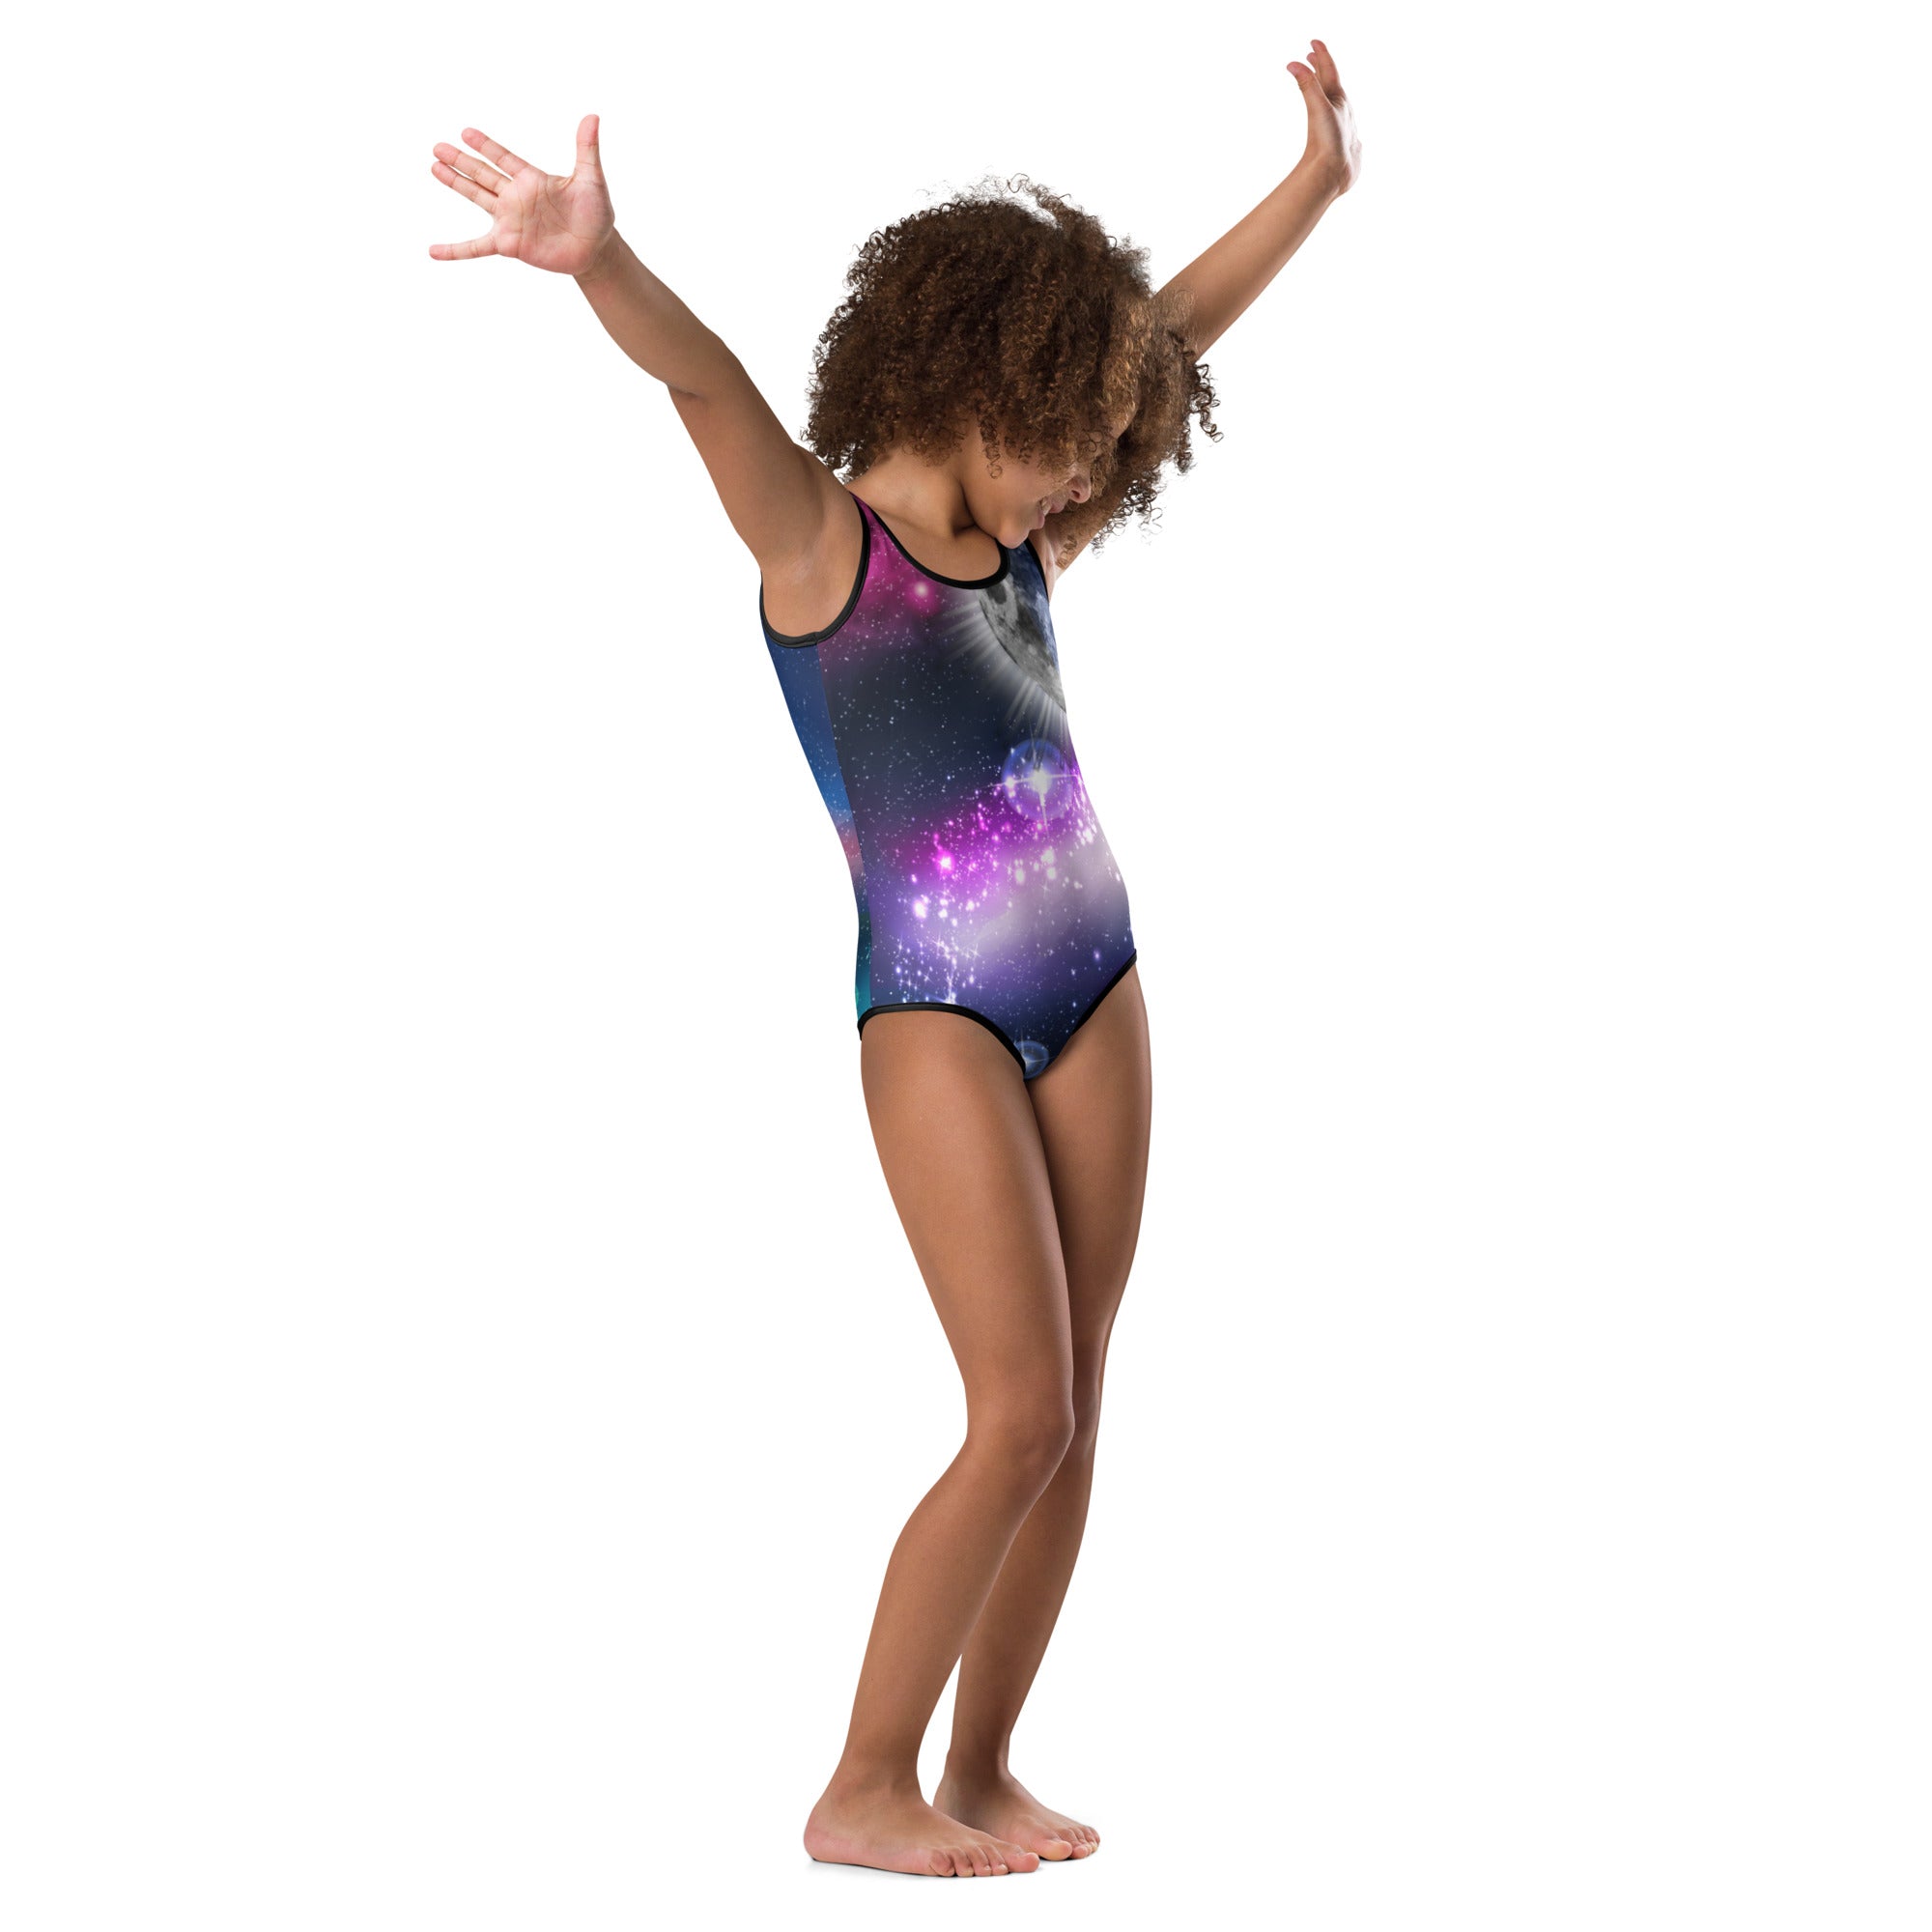 To The Moon Child Swimsuit